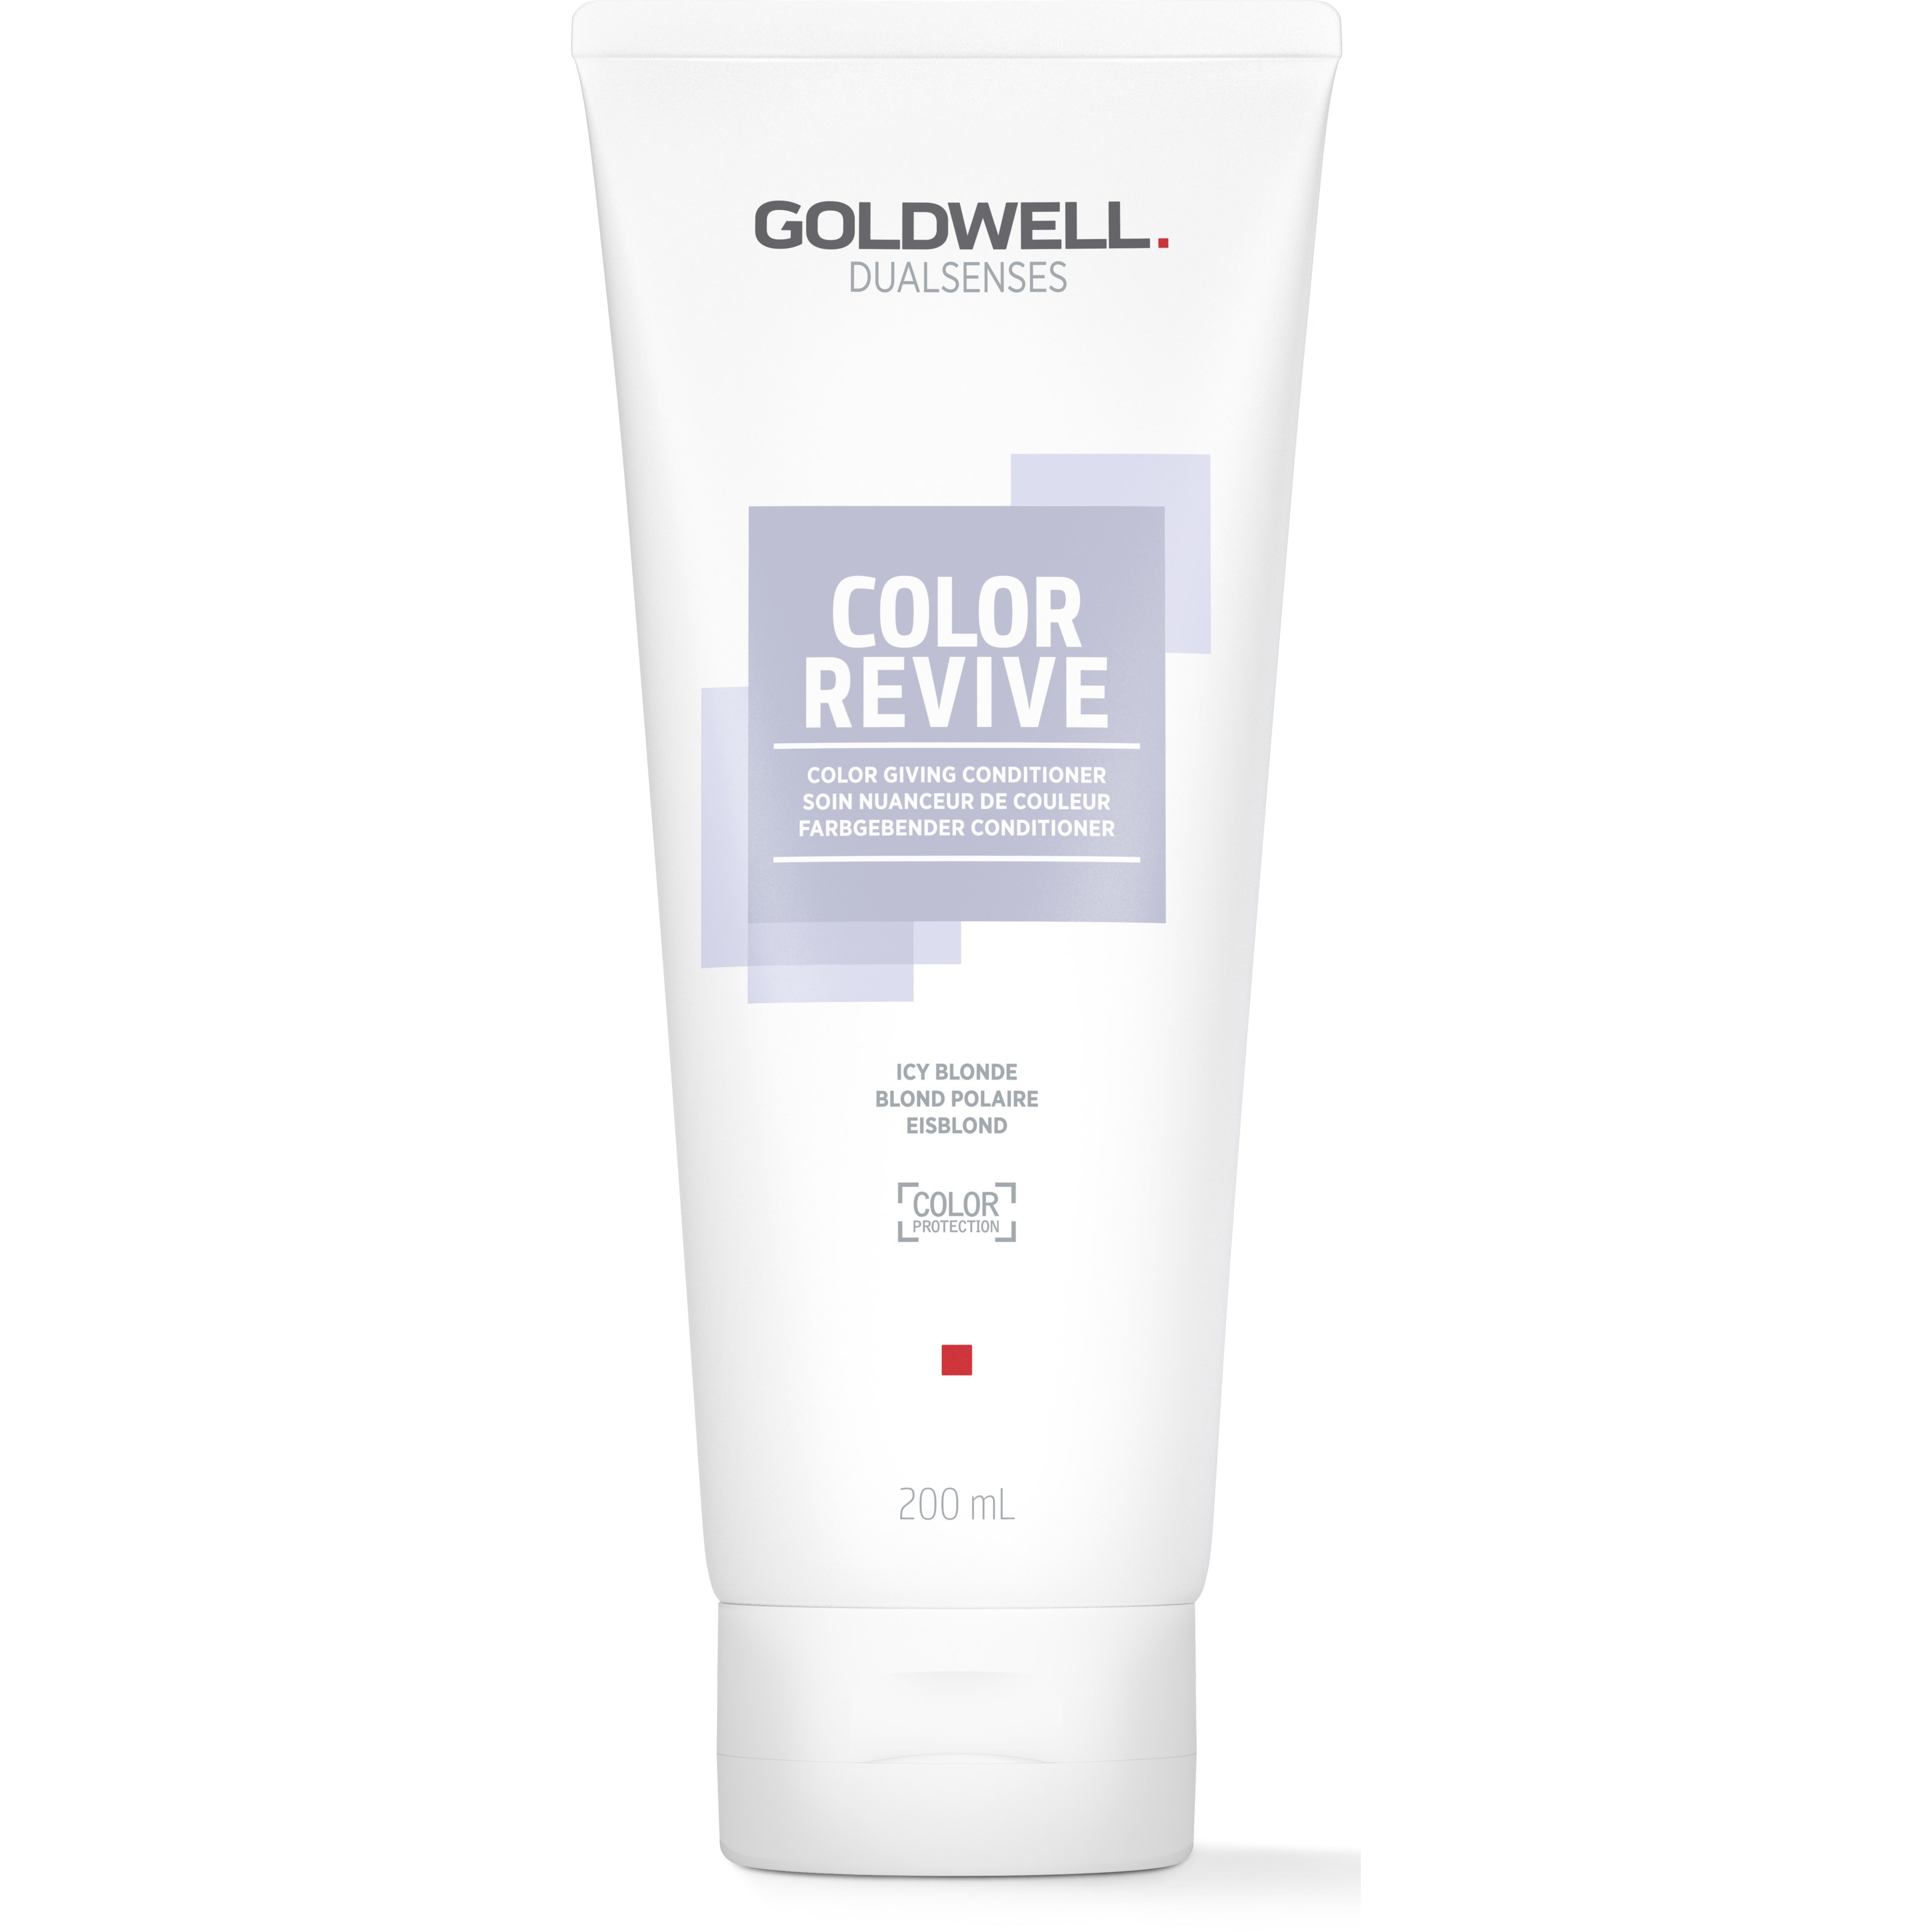 Läs mer om Goldwell Dualsenses Color Revive Color Giving Conditioner Icy Blonde